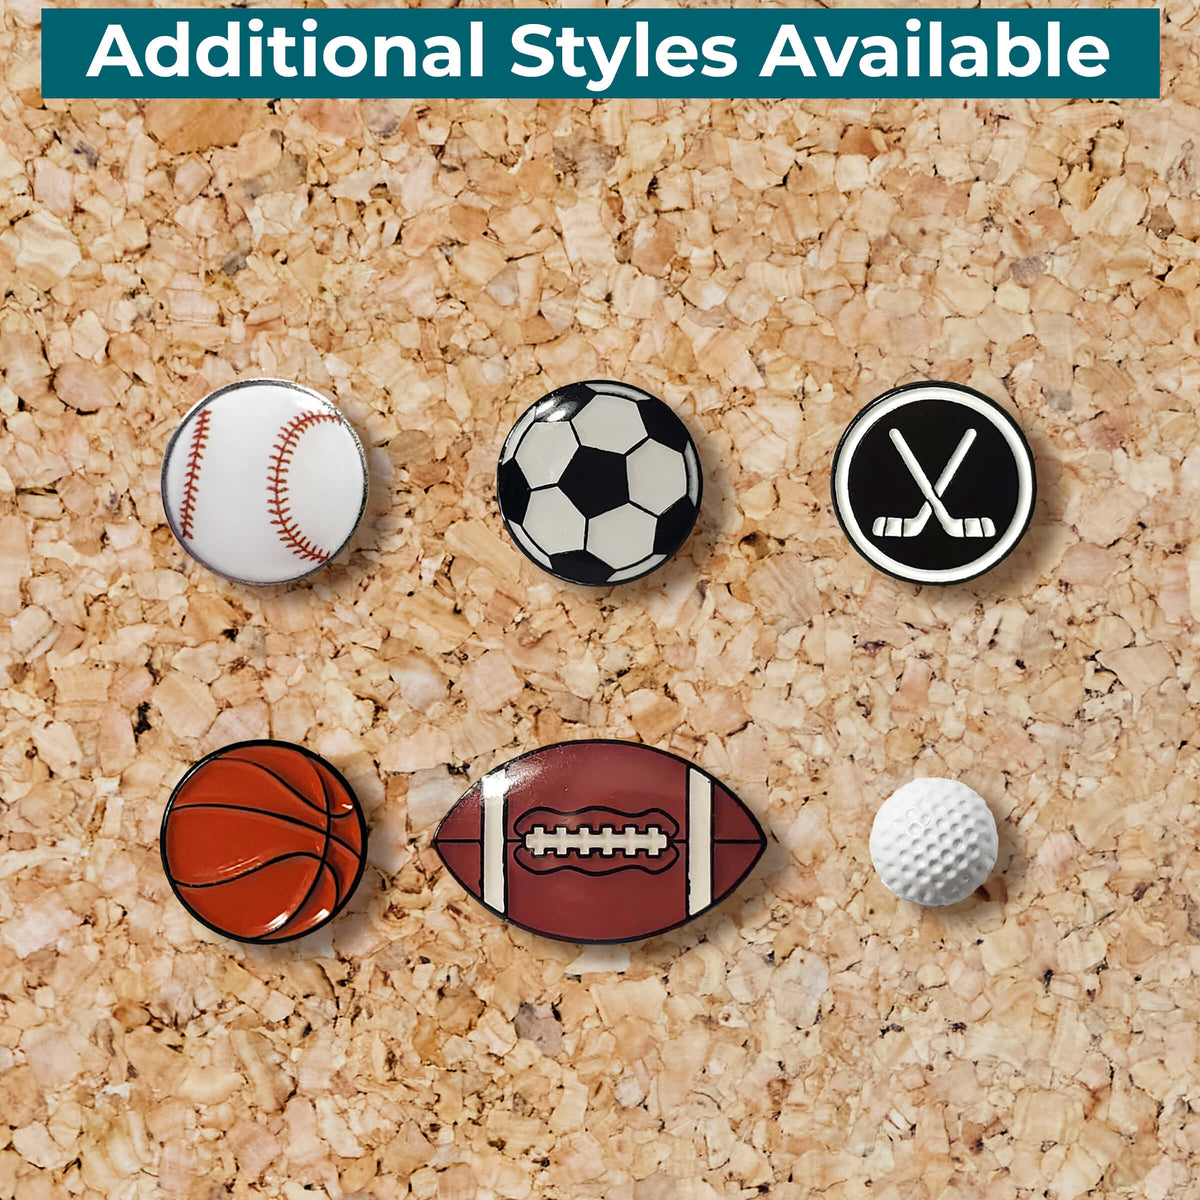 Multiple Styles of Novelty Sports Push Pins are Available at Push Pin Travel Maps